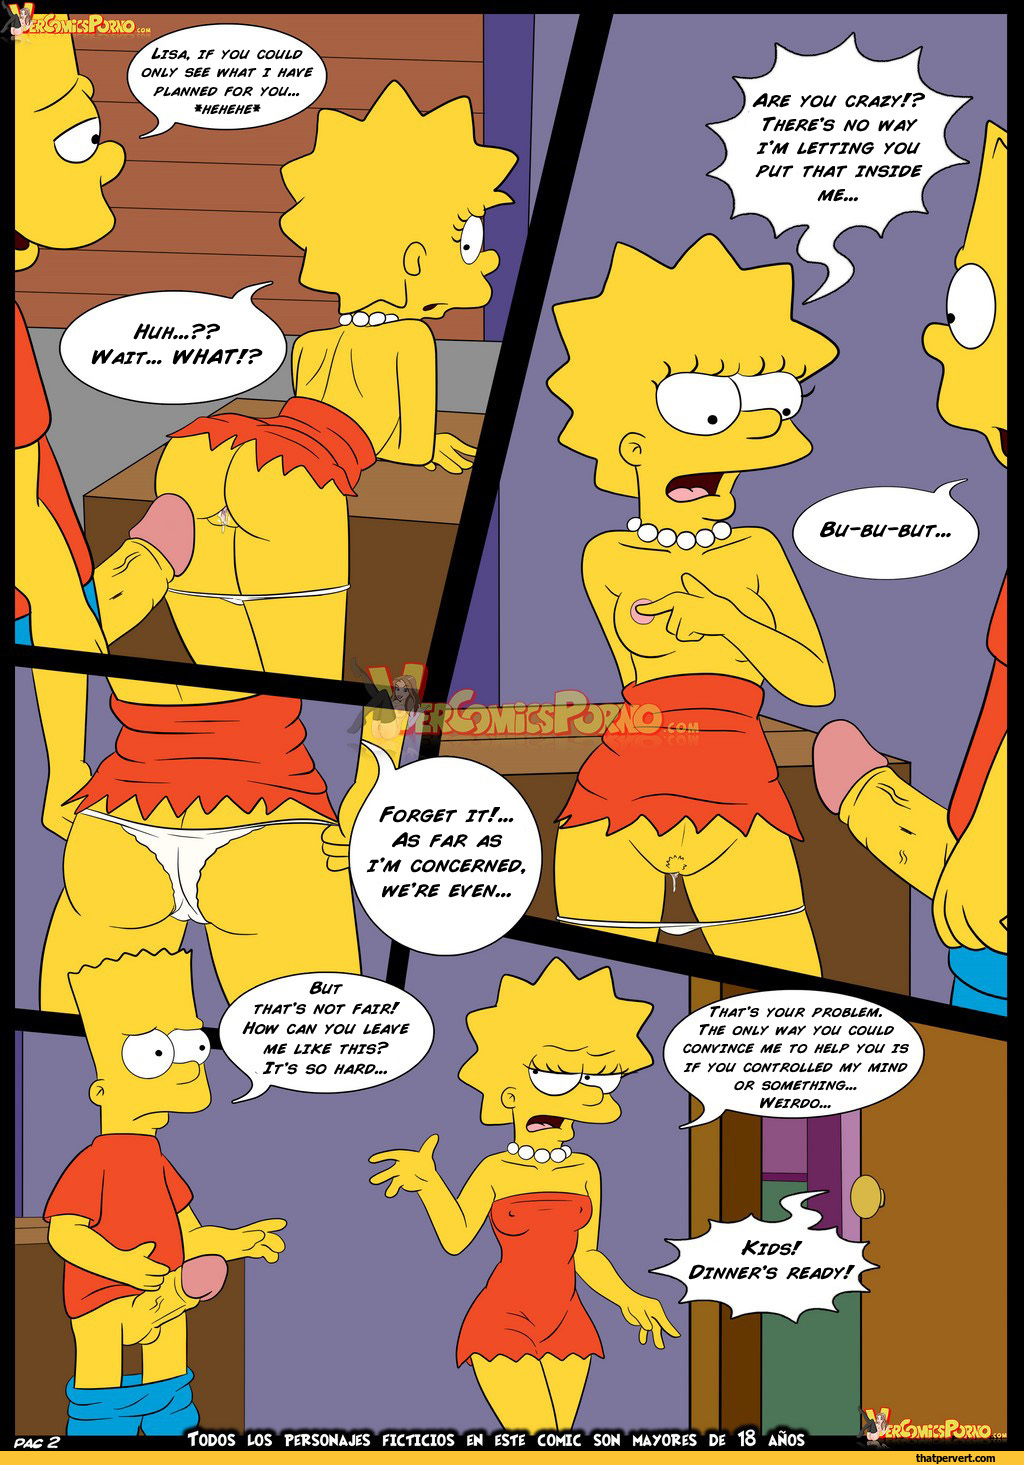 translation porn comics marge simpson pmlisa if you could only see what i haveplannfd for you are you